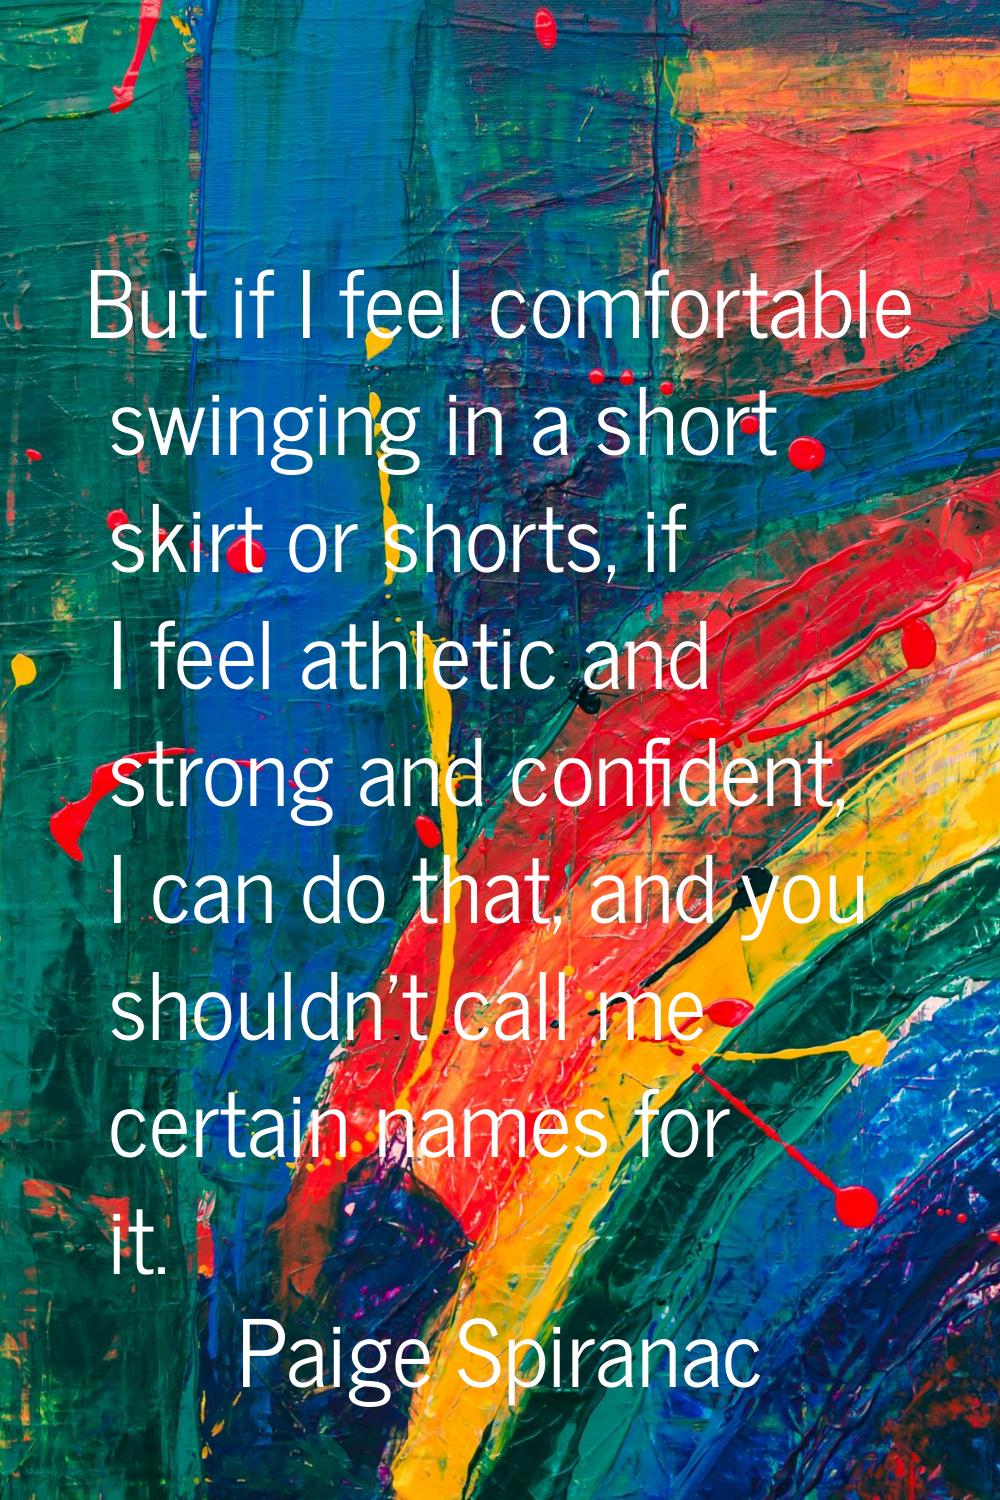 But if I feel comfortable swinging in a short skirt or shorts, if I feel athletic and strong and co